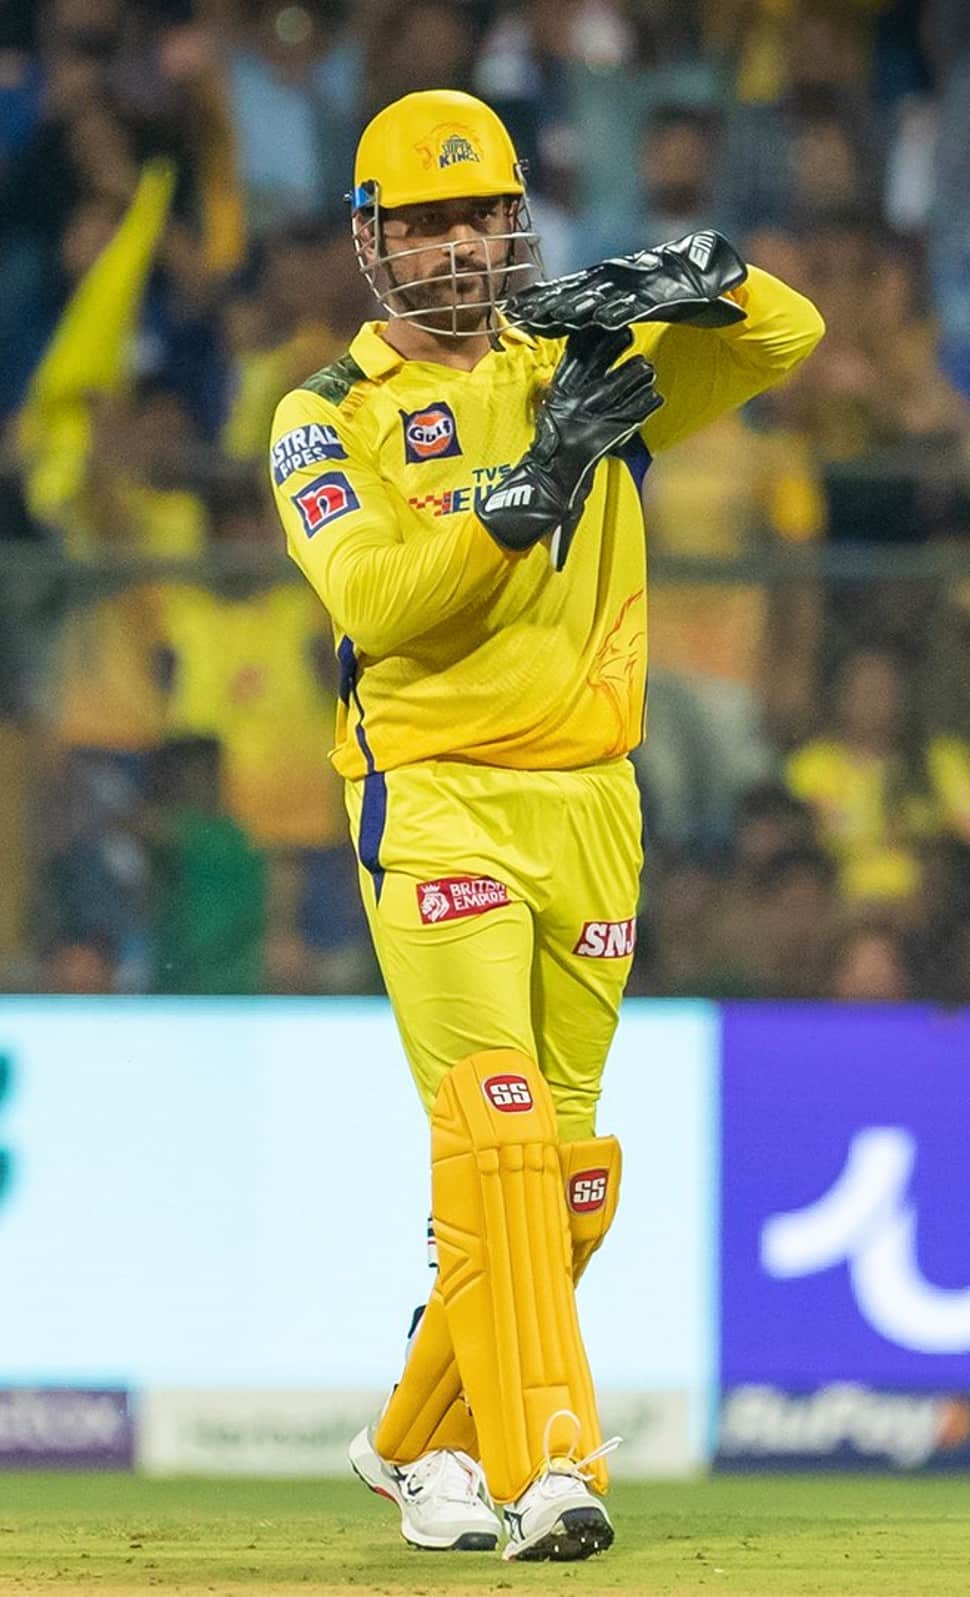 Top 999+ csk ms dhoni images Amazing Collection csk ms dhoni images